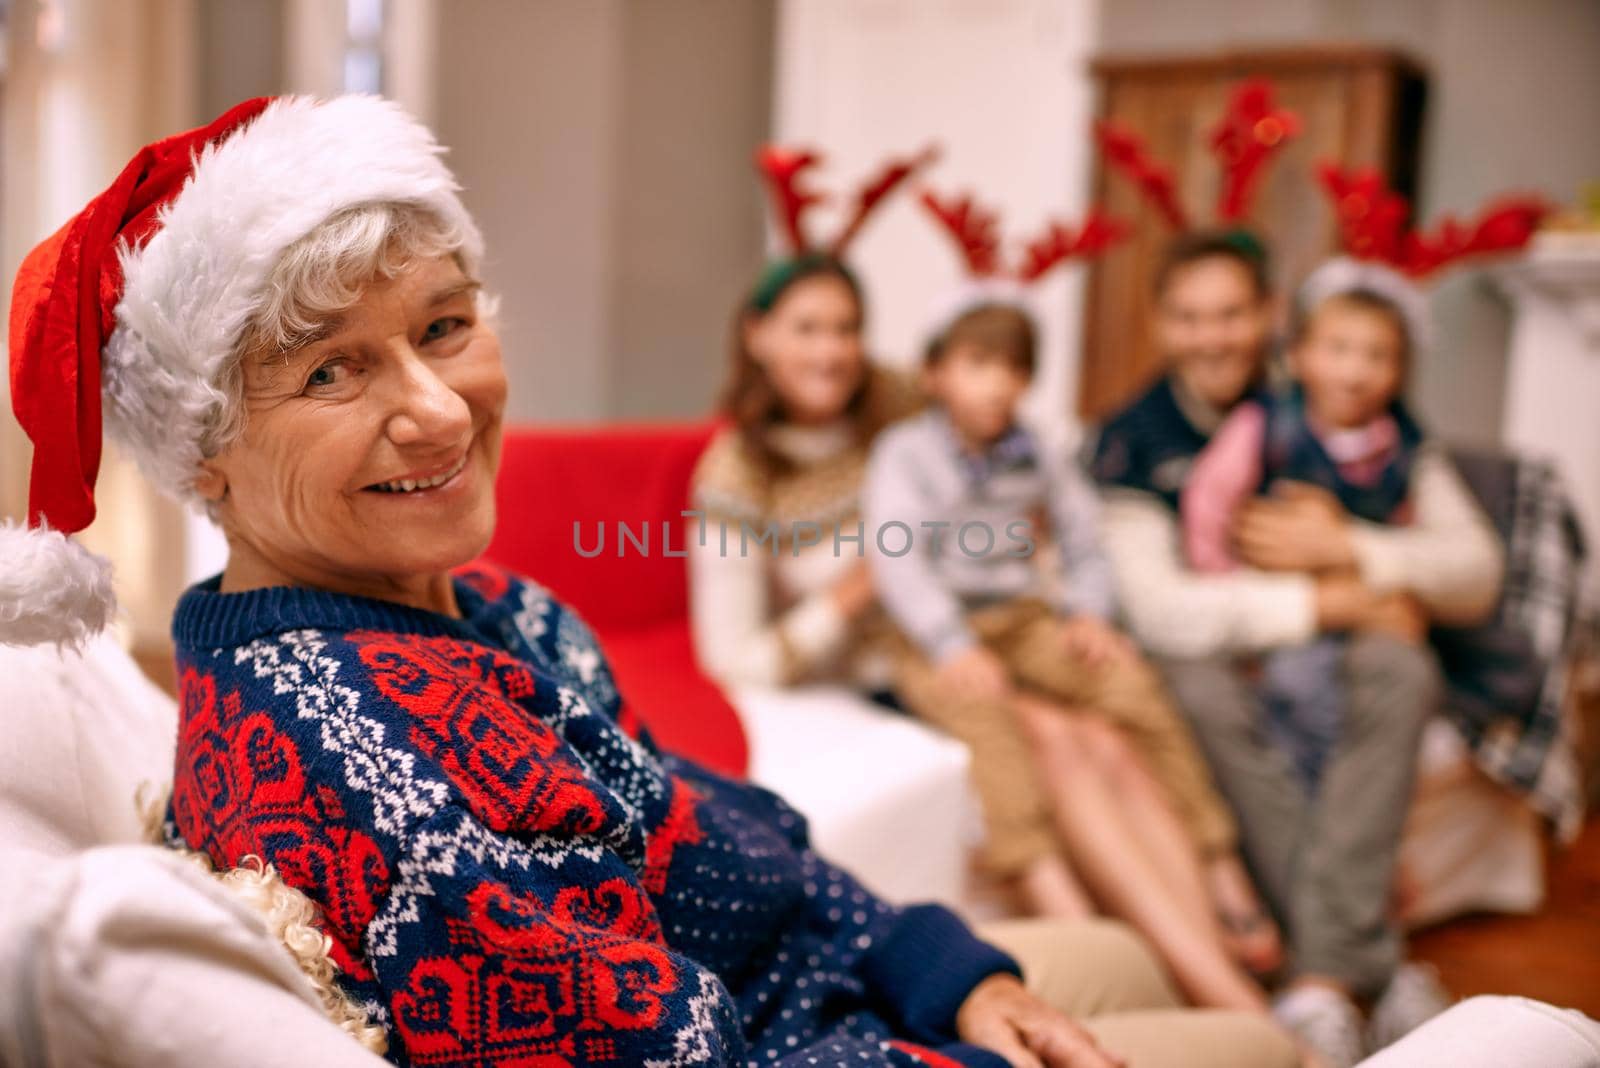 A happy grandmother with her family on Christmas Eve.